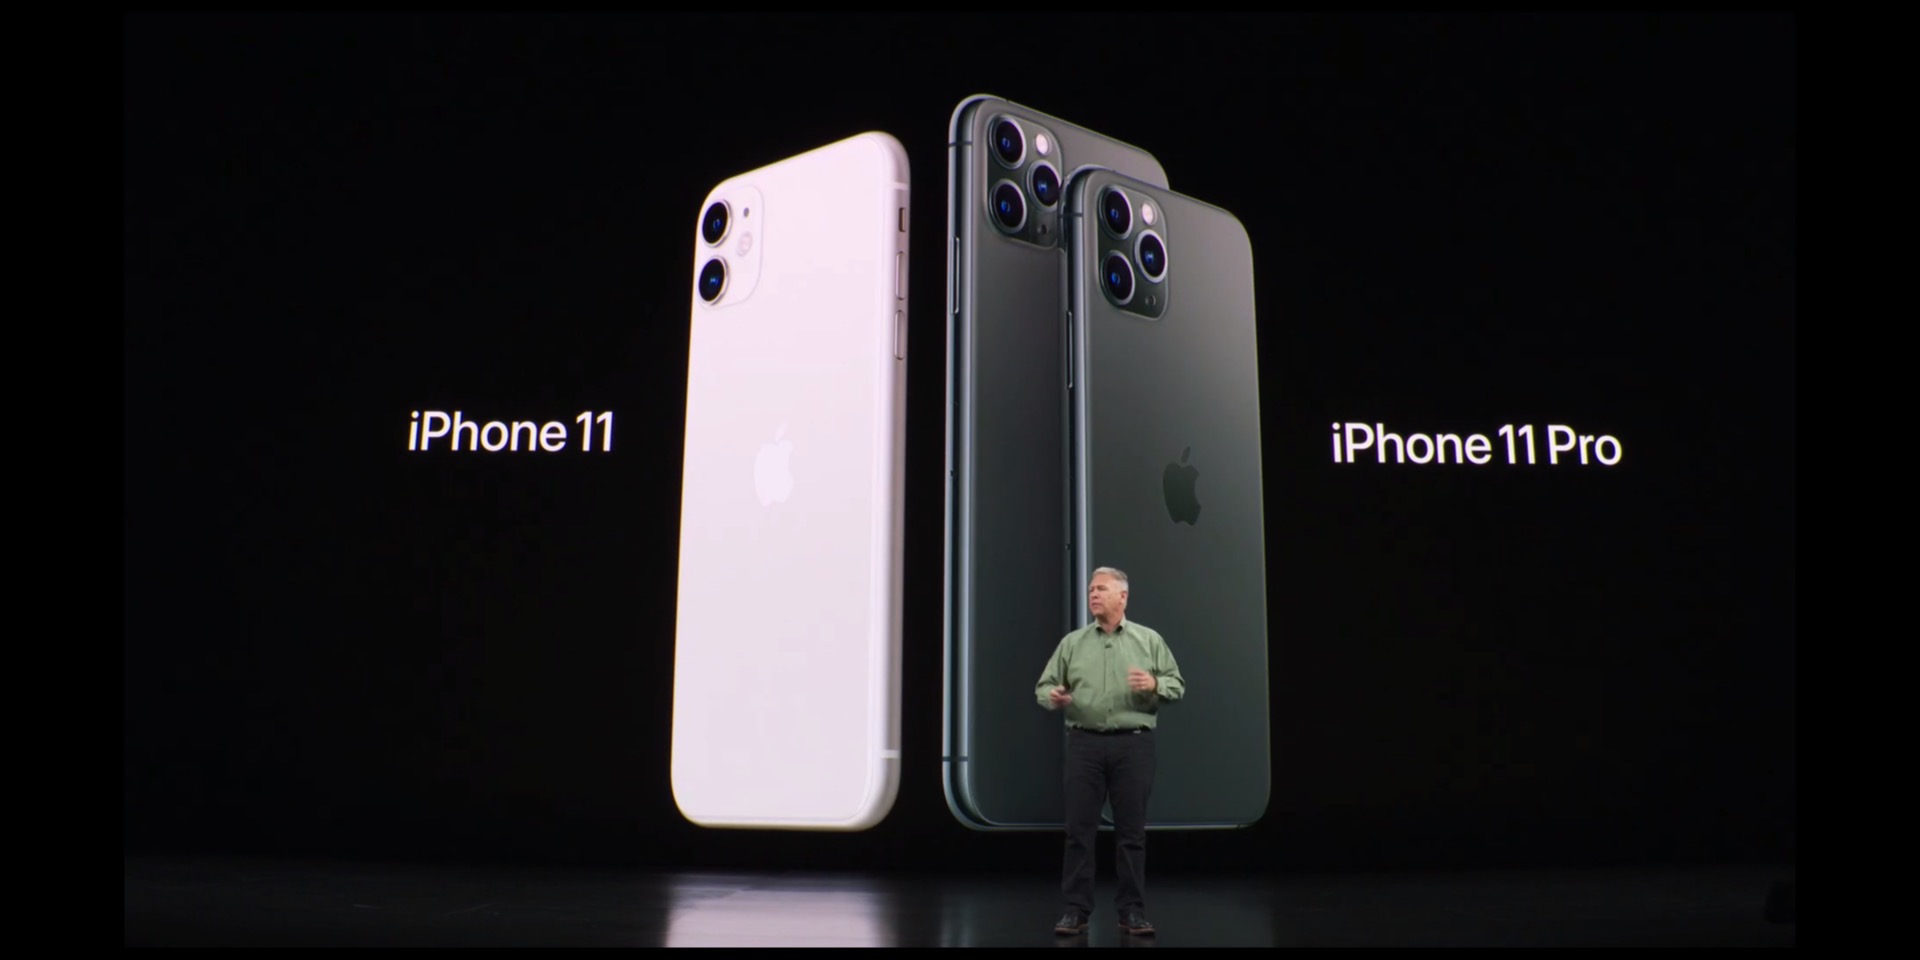 Here's how much AppleCare+ will cost for iPhone 11 and iPhone 11 